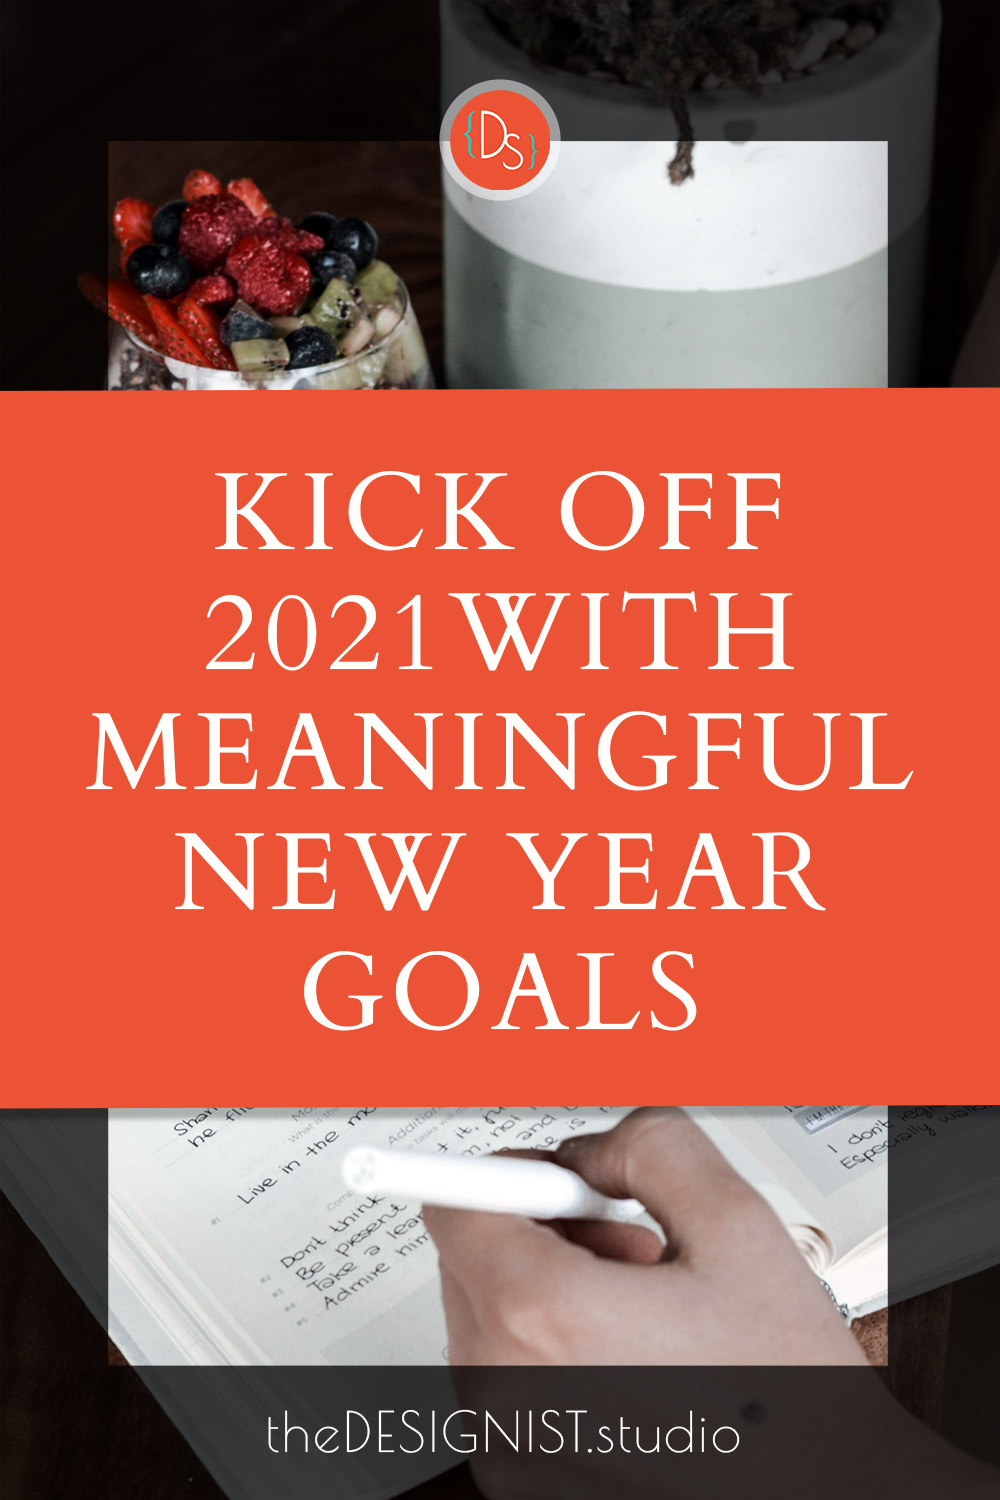 Kick off 2021 with meaningful new year goals